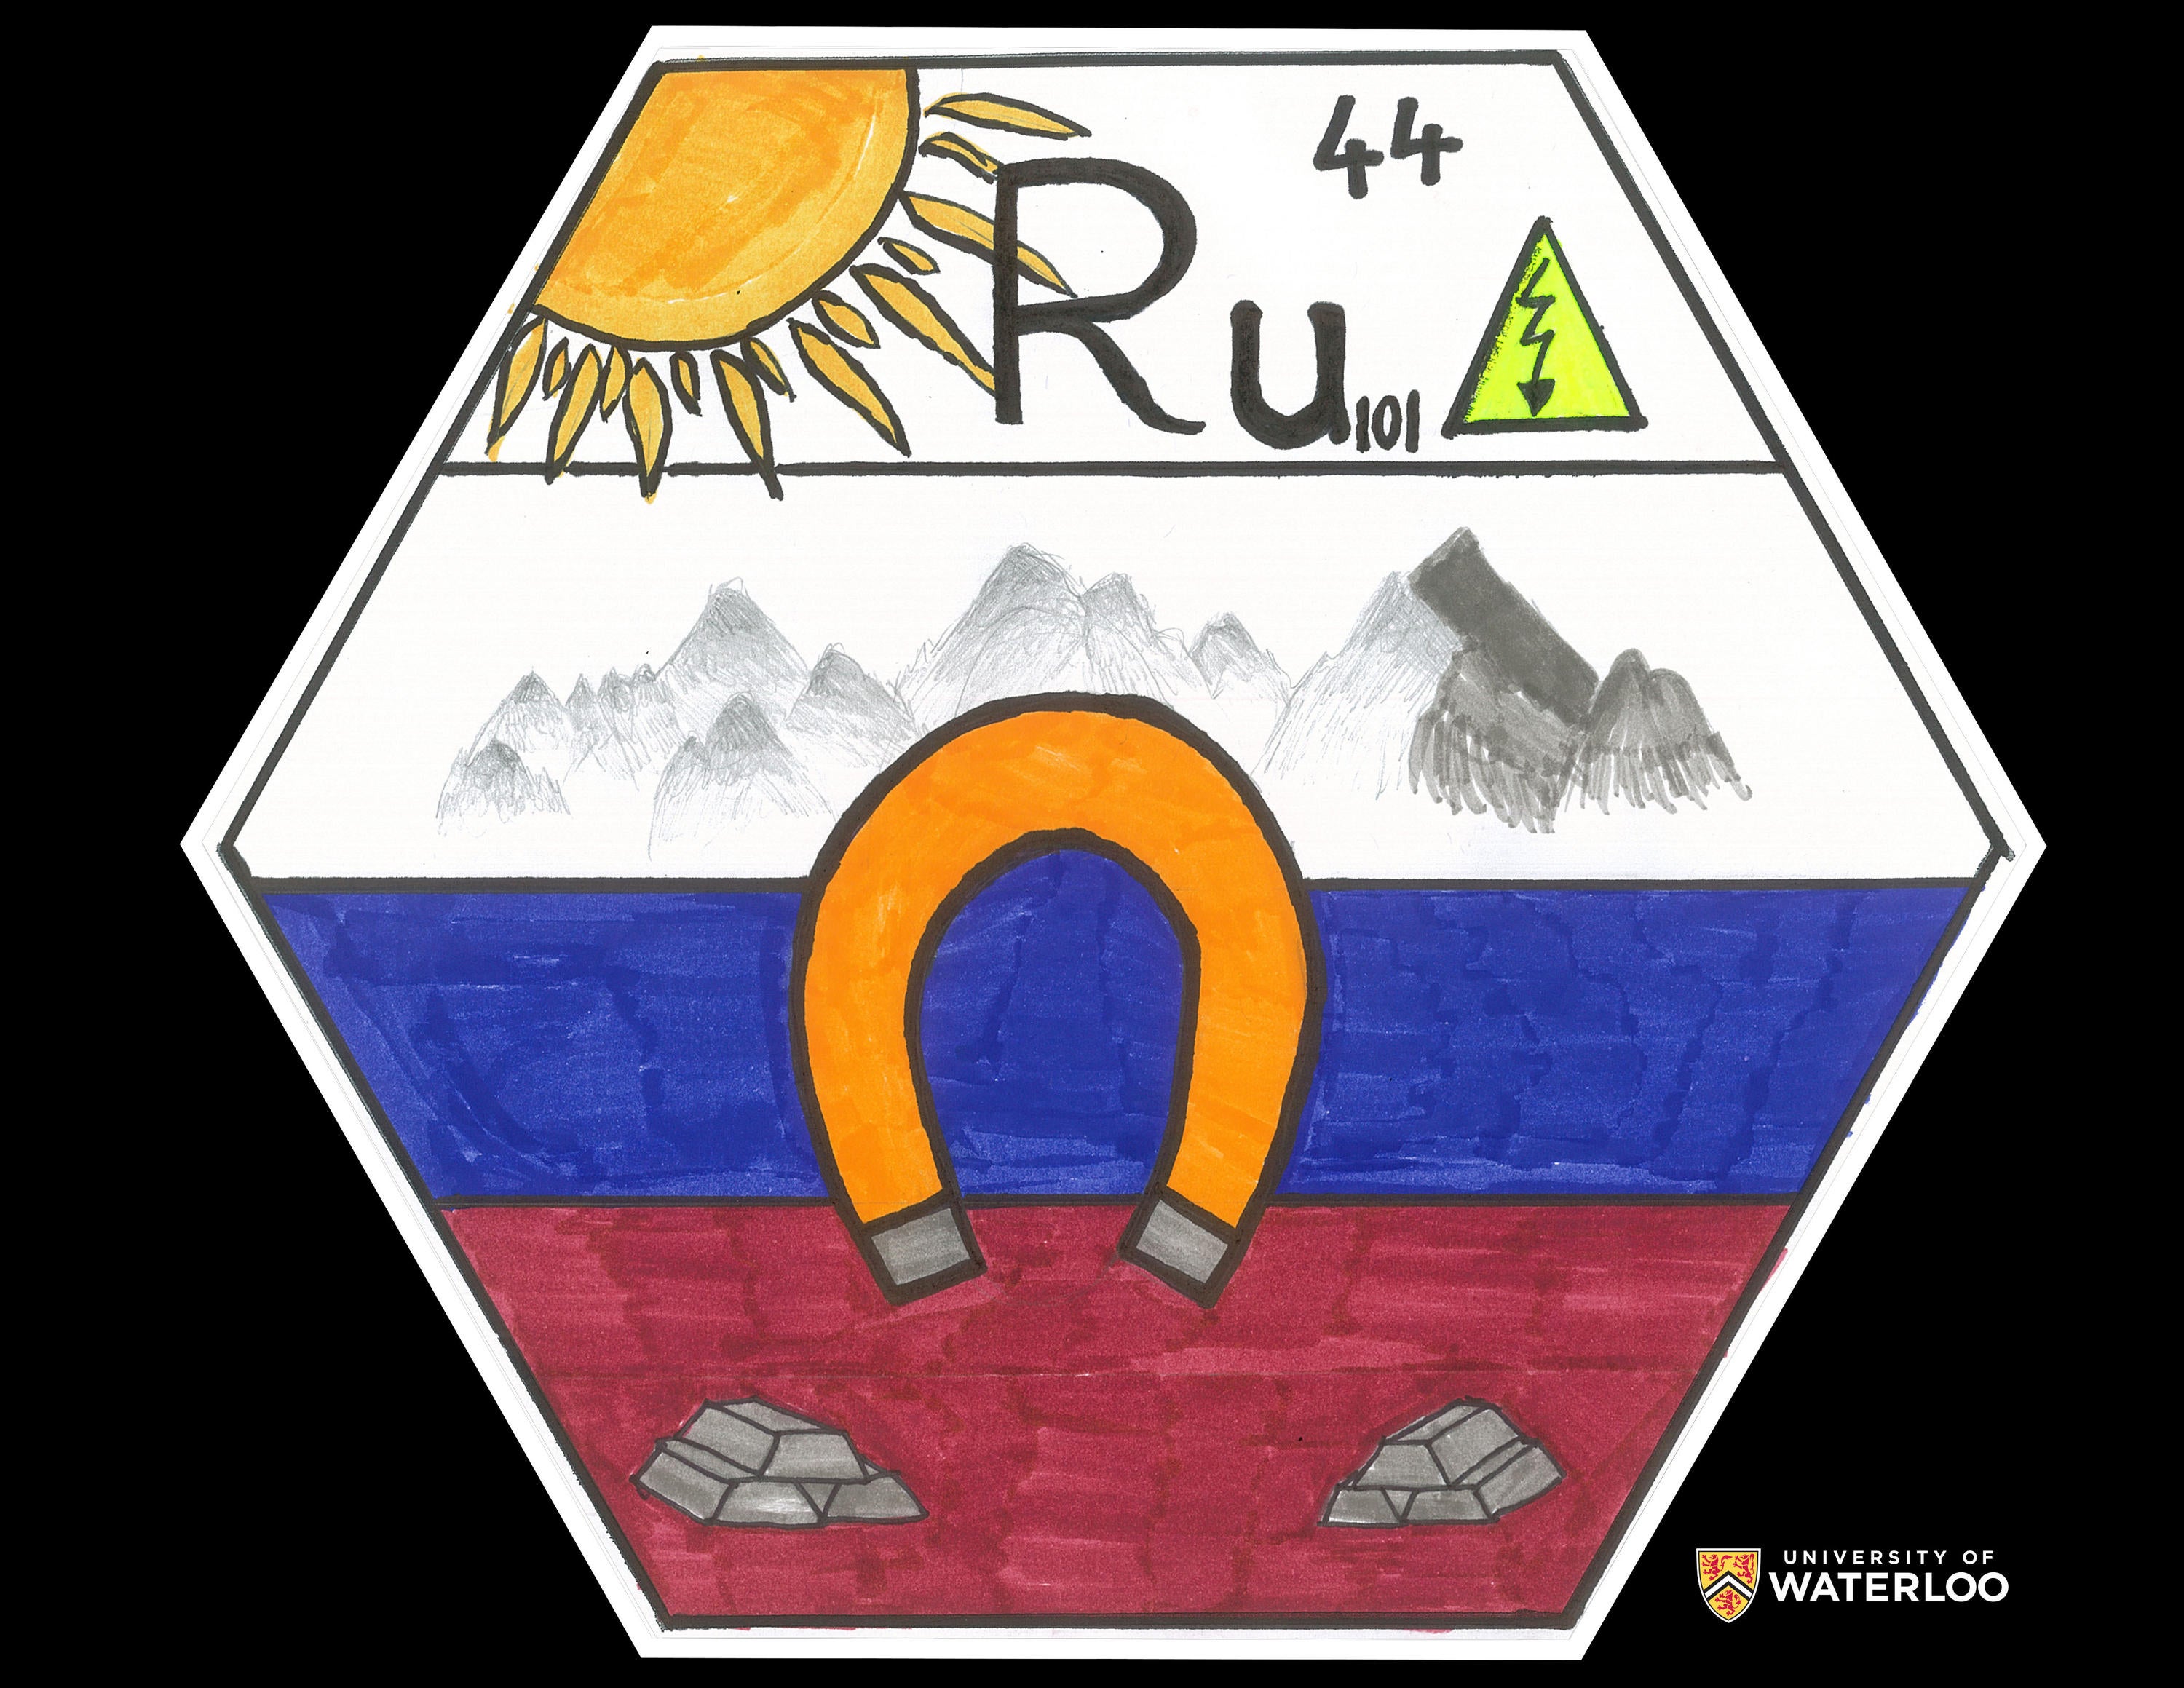 Pen and ink on paper. Chemical symbol “Ru” with atomic number “44” and atomic weight 101 at the top along with the sun and a high-voltage hazard symbol. Background, middle and foreground colored to look like the Russian flag. Mountains in the background; a horseshoe magnet; centre bottom are grey bars of pure ruthenium.